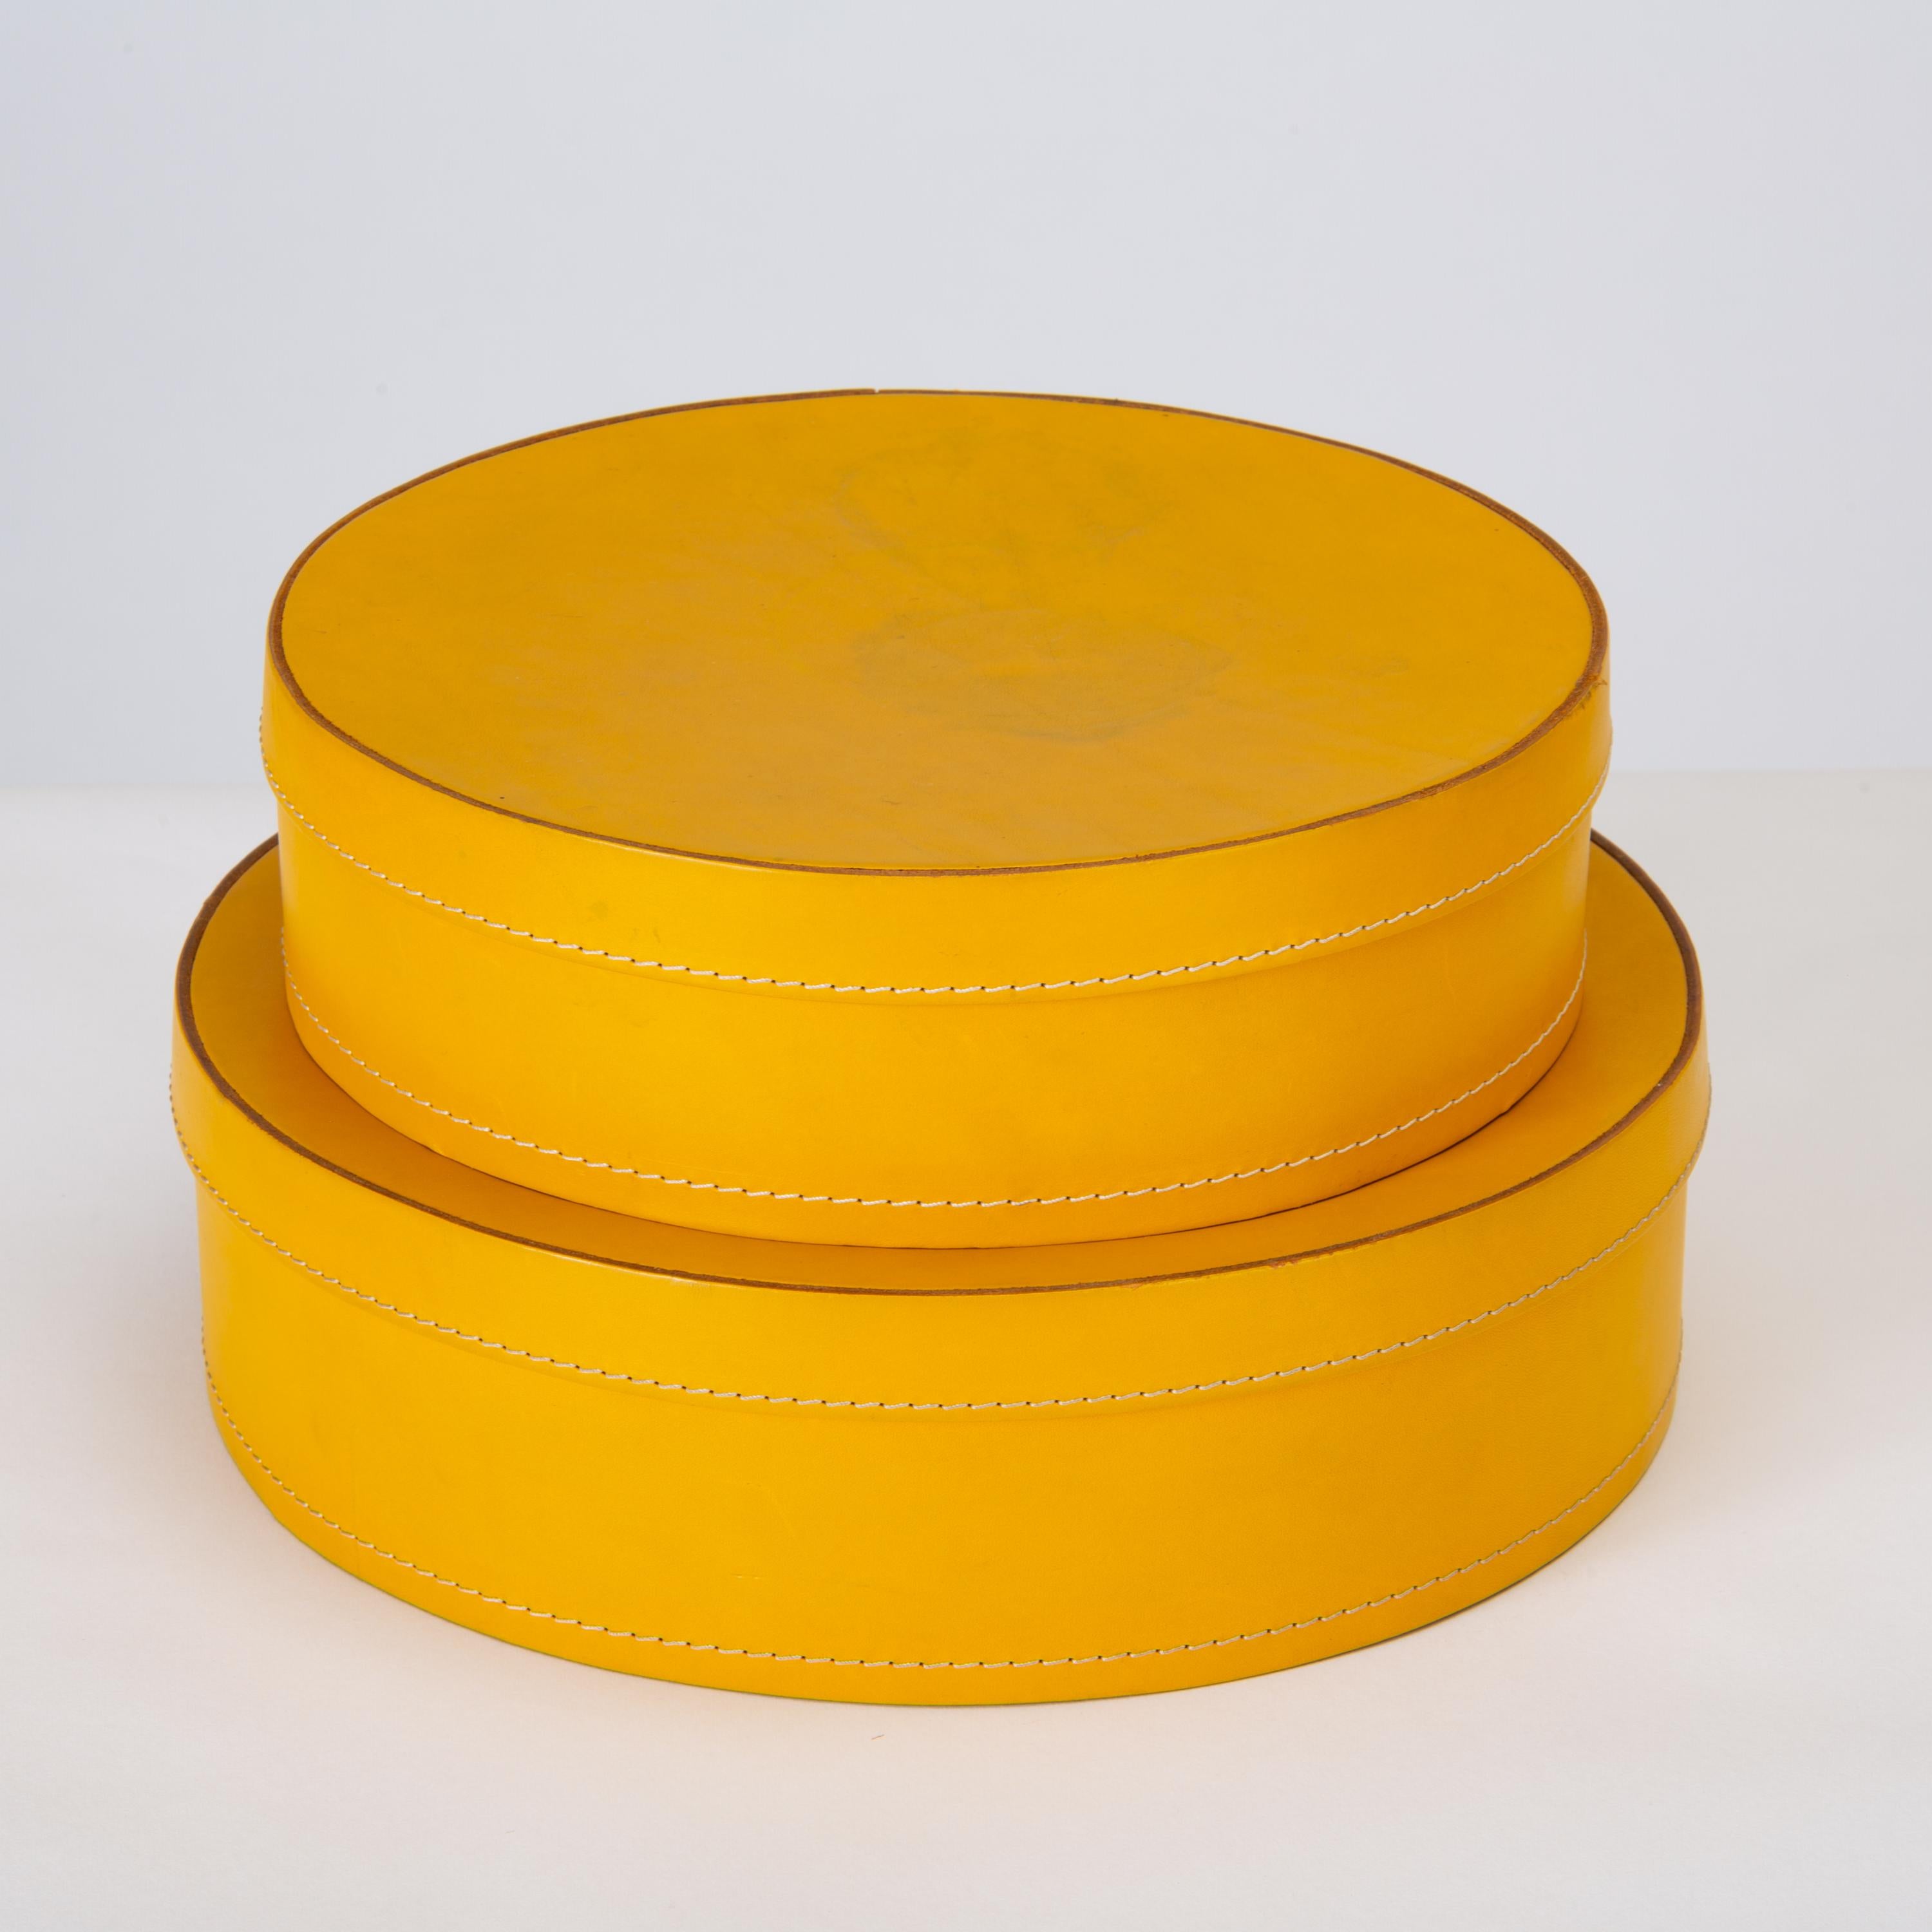 A pair of round nesting boxes in mustard-colored leather by Italian company Arte Cuoio e Triangolo. The “1980” design features a rounded frame, straight sides, and a snug-fitting lid with contrast stitching in Danish flower thread. This set has two